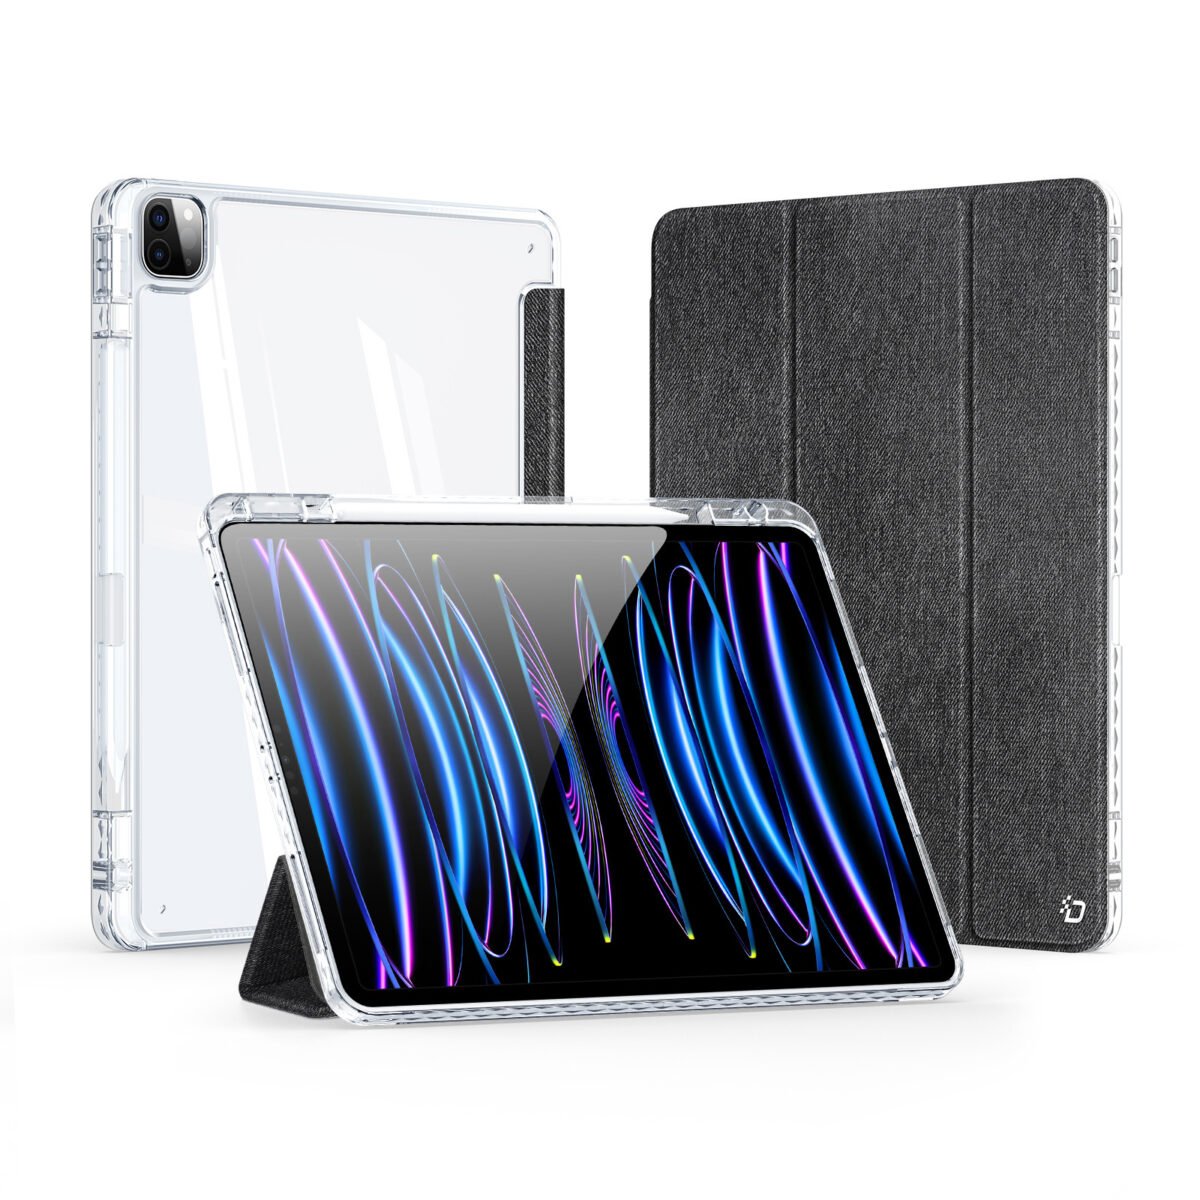 Unid Series Case for iPad Pro 12.9 (2018/2020/2021/2022) (With Apple Pencil Holder & Auto Sleep Wake)